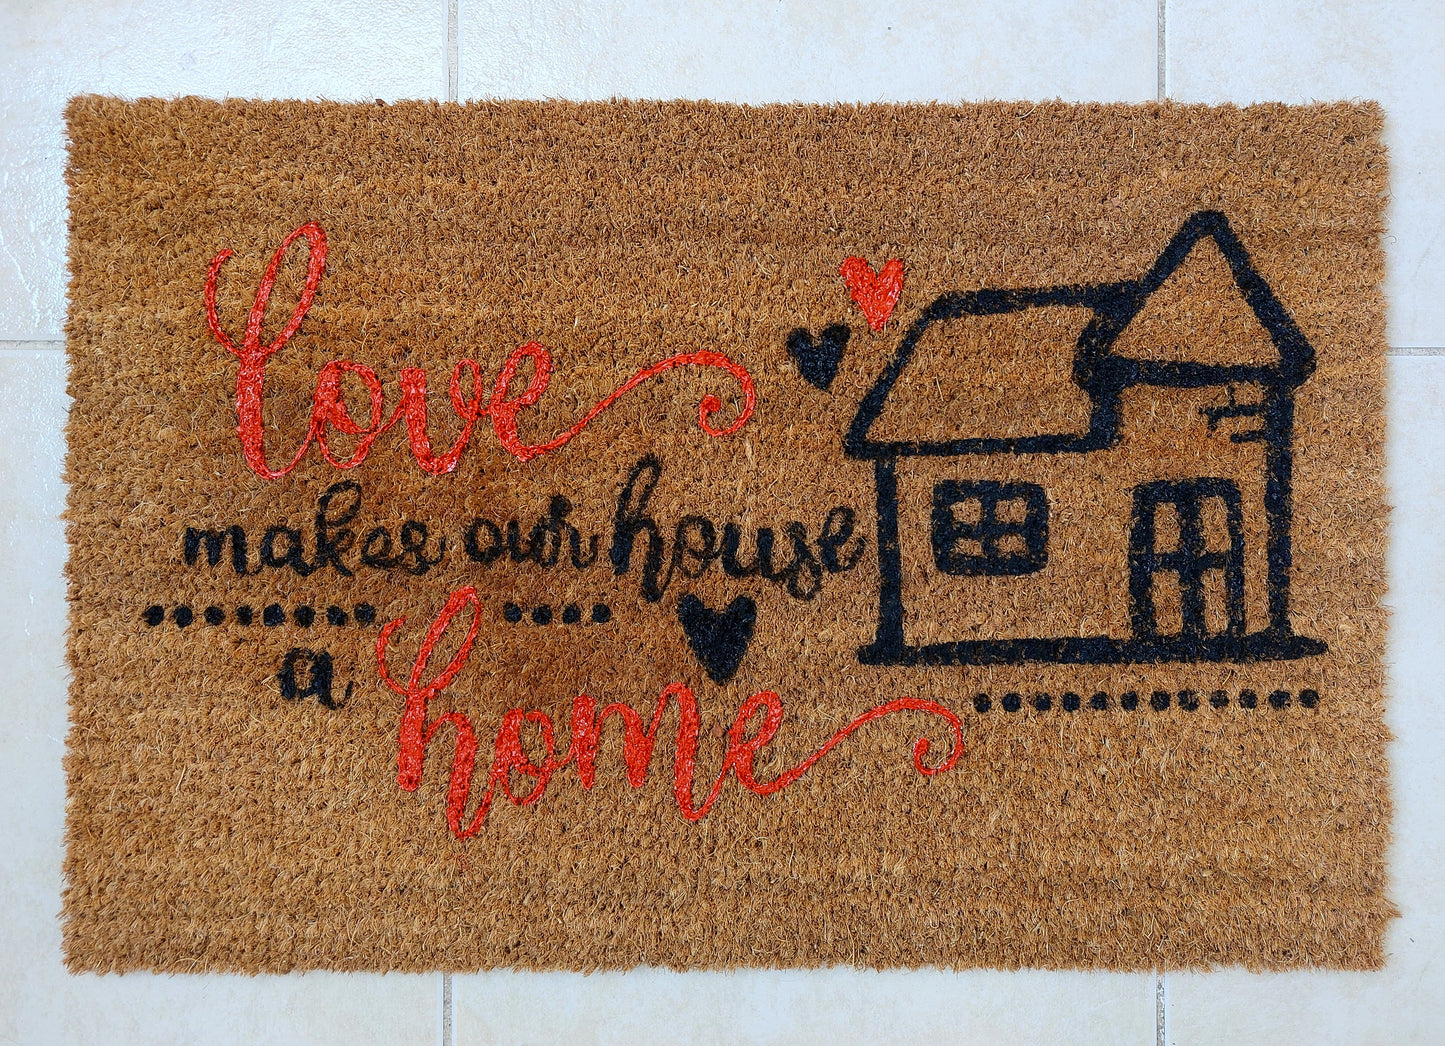 Love Makes Our House a Home Doormat